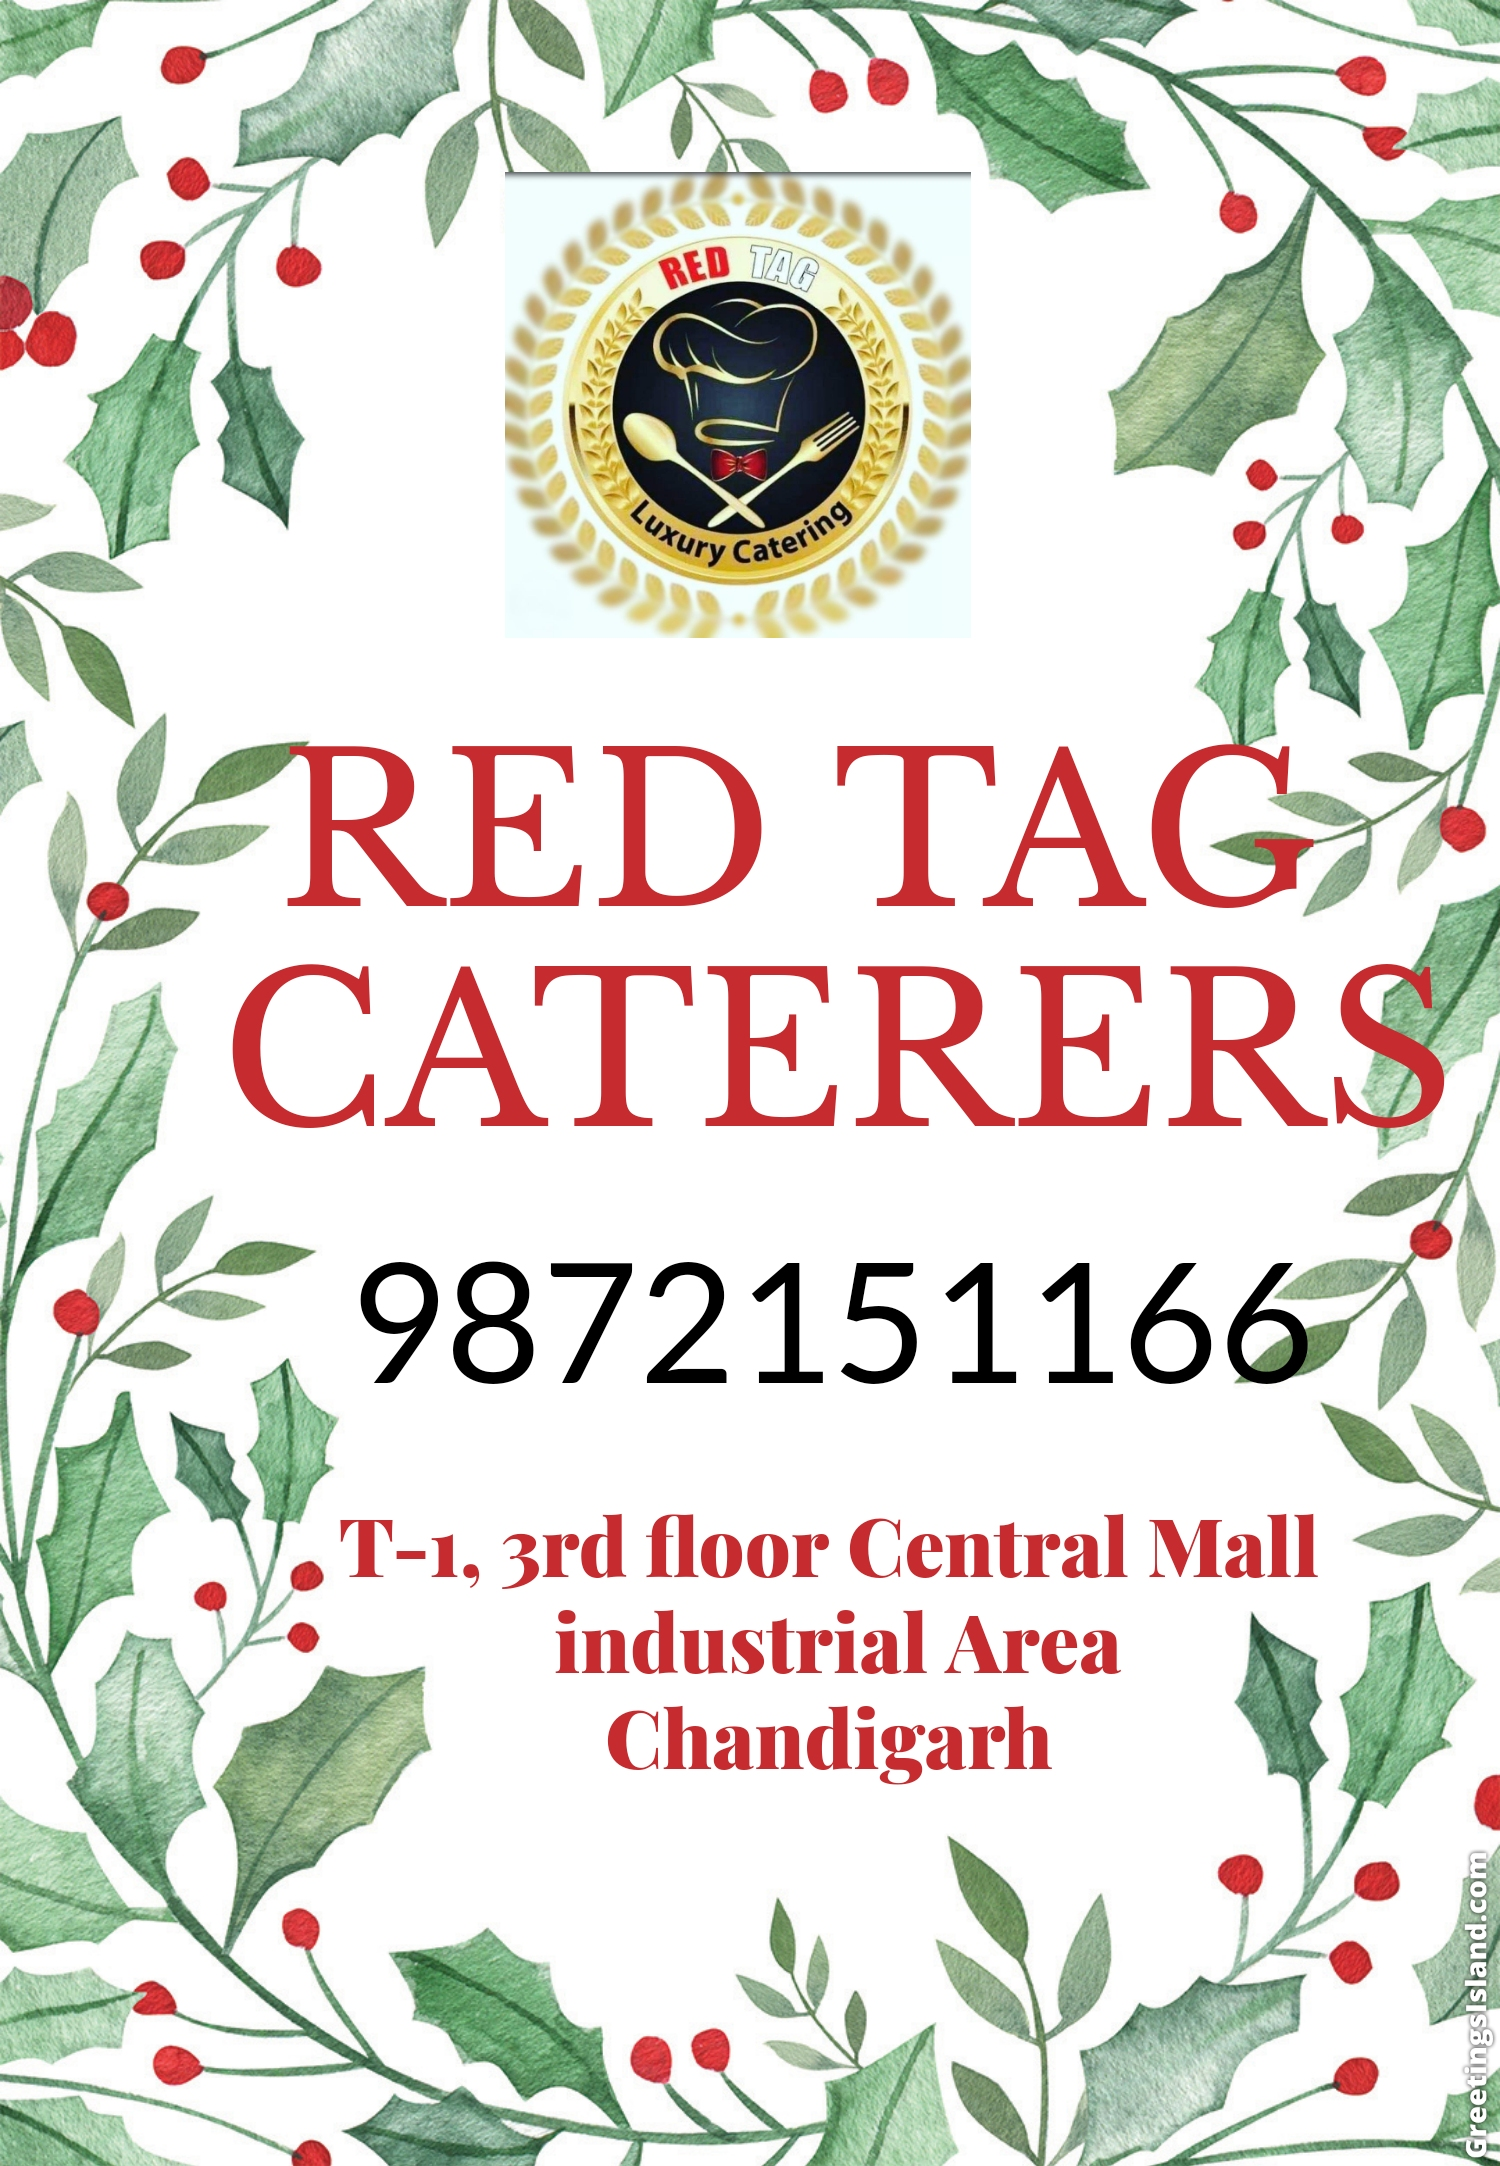 LUXURY CATERING IN CHANDIGARH  | Red Tag Caterers | Vegetarian or non-vegetarian catering service in Chandigarh, top caterer in Chandigarh, hygiene catering service in Chandigarh, royal catering service in Chandigarh, exclusively cater in Chandigarh  - GL98891